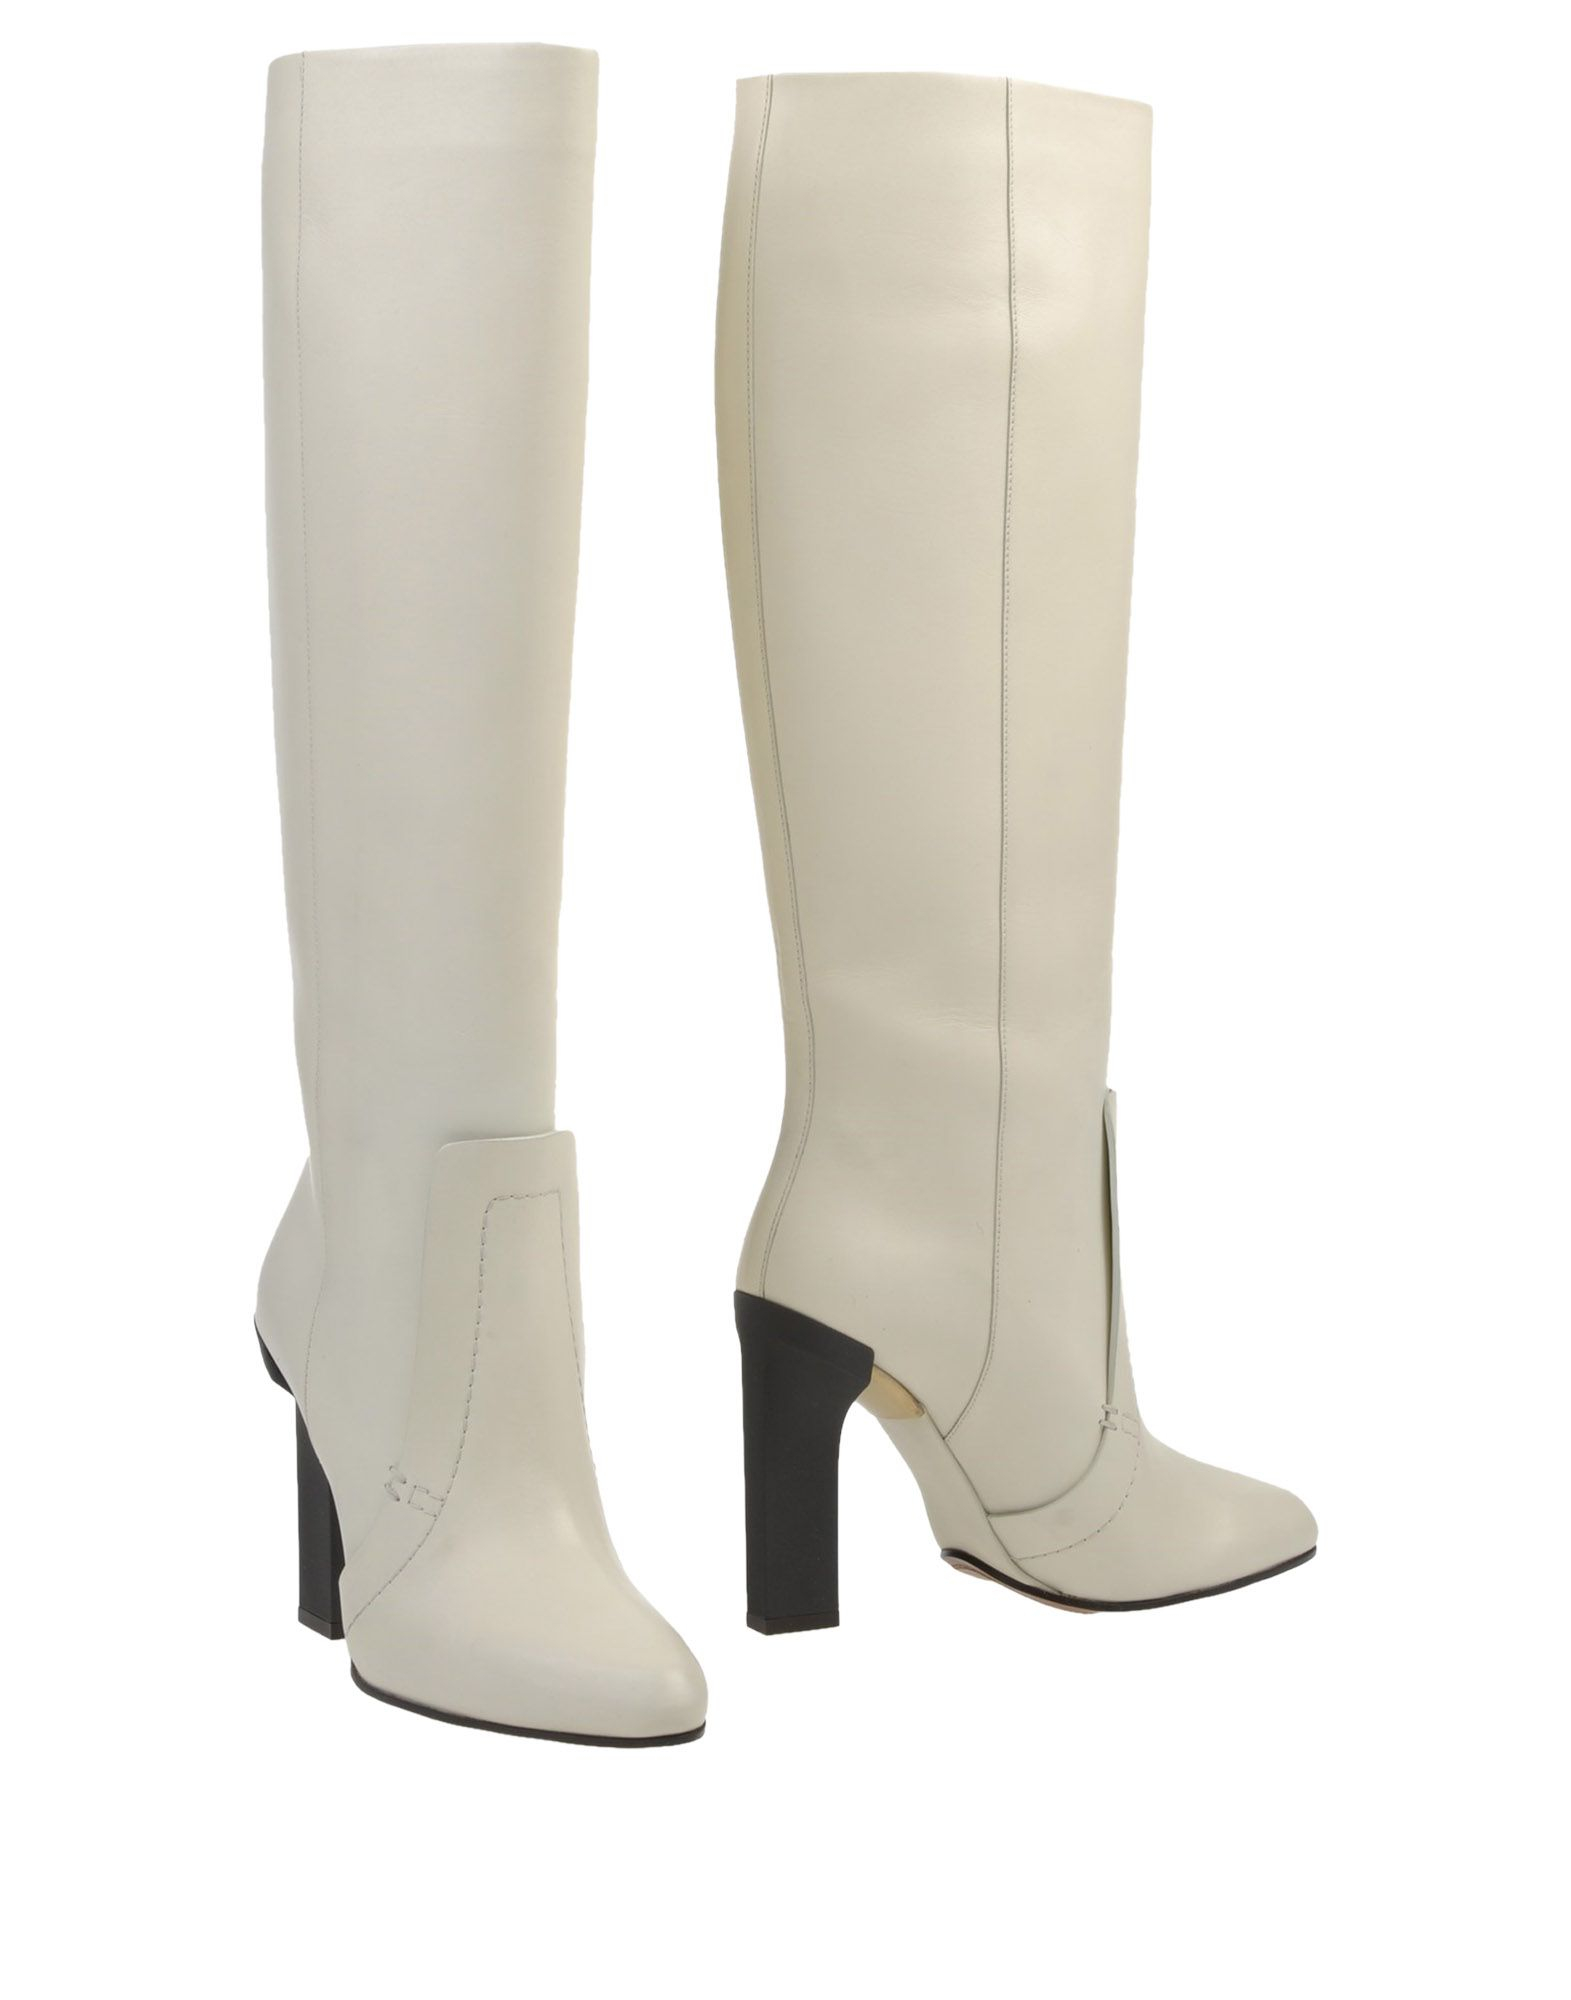 Calvin Klein Leather Boots in Ivory (White) - Lyst